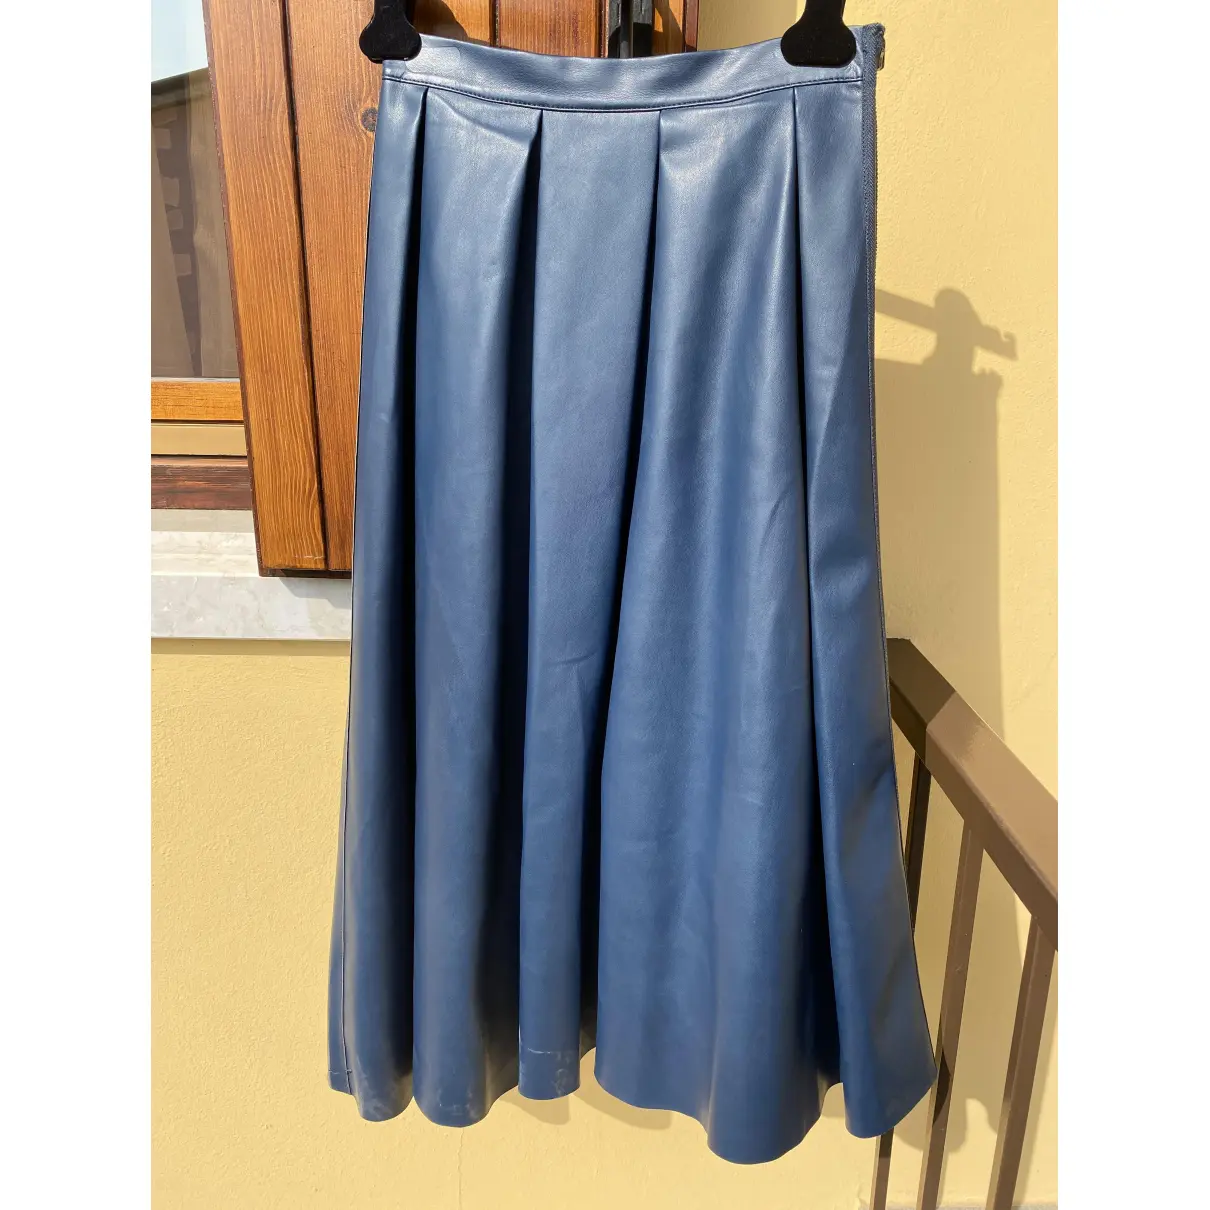 Buy Stand studio Leather maxi skirt online